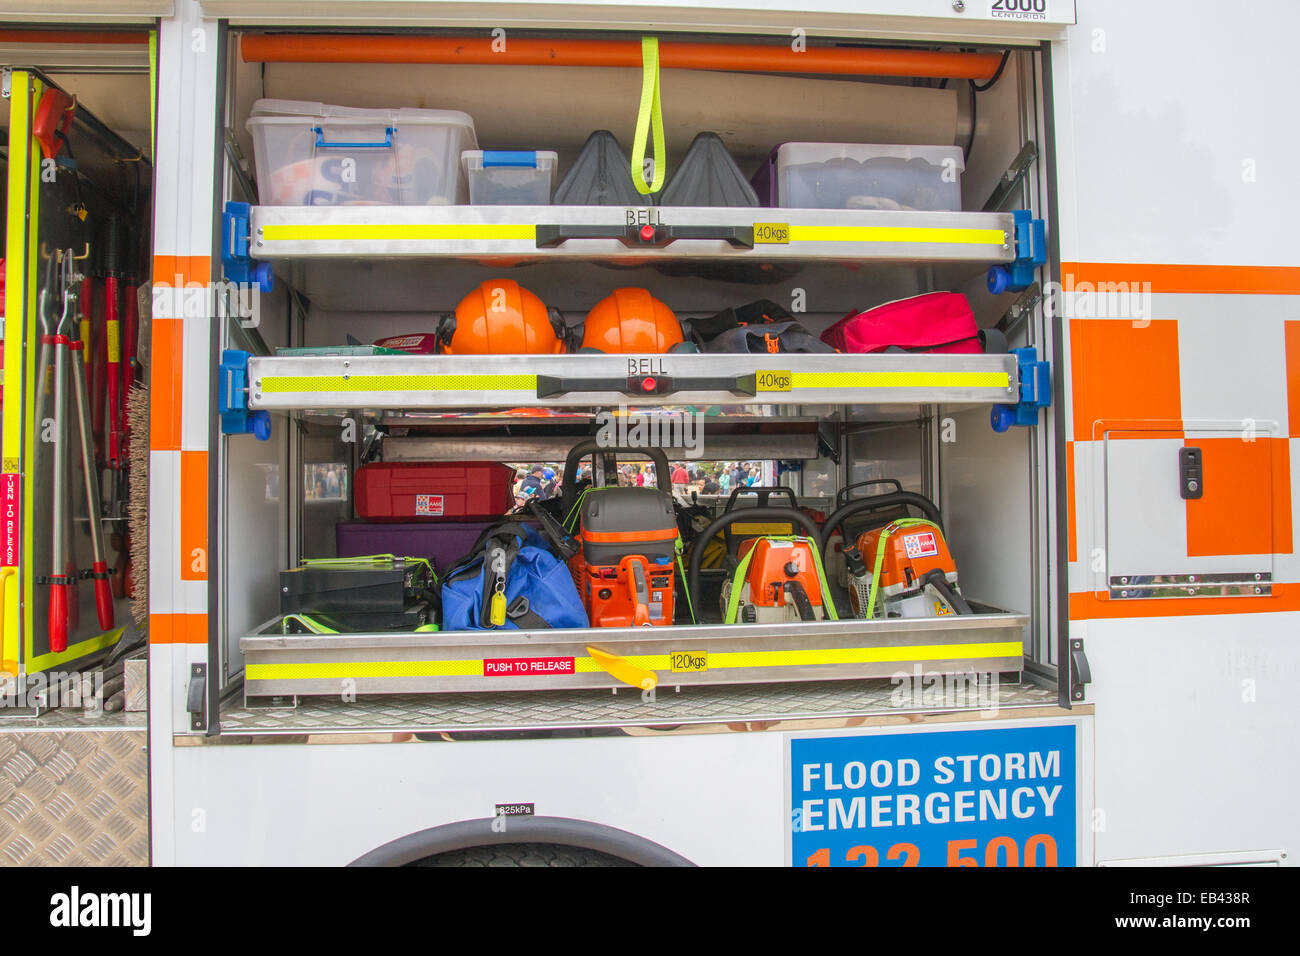 State Emergency Service, SES, vehicle and equipment on display in Melbourne, Australia Stock Photo